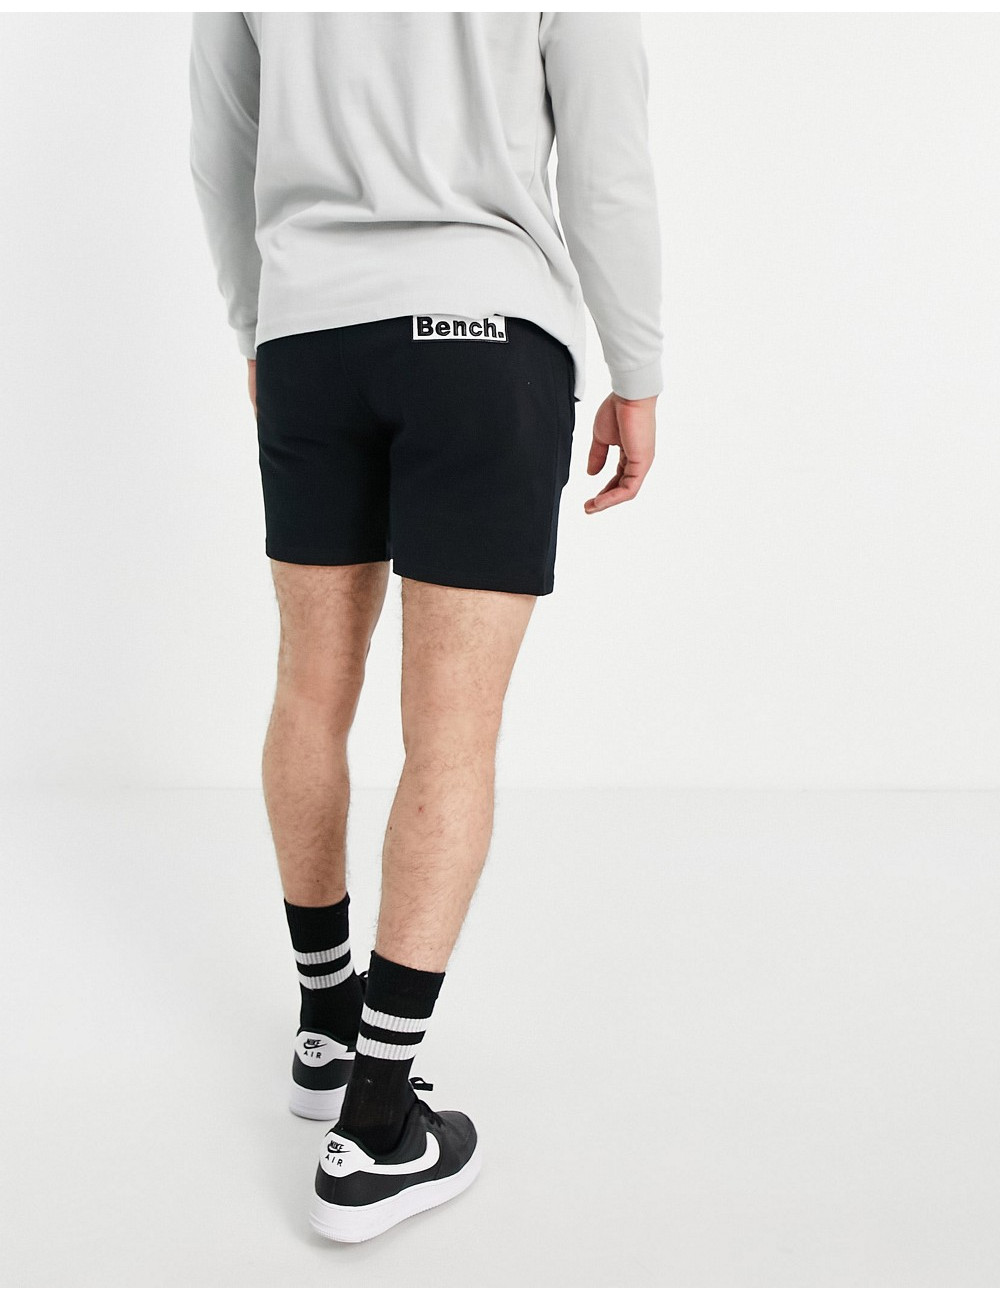 Bench jersey shorts in black